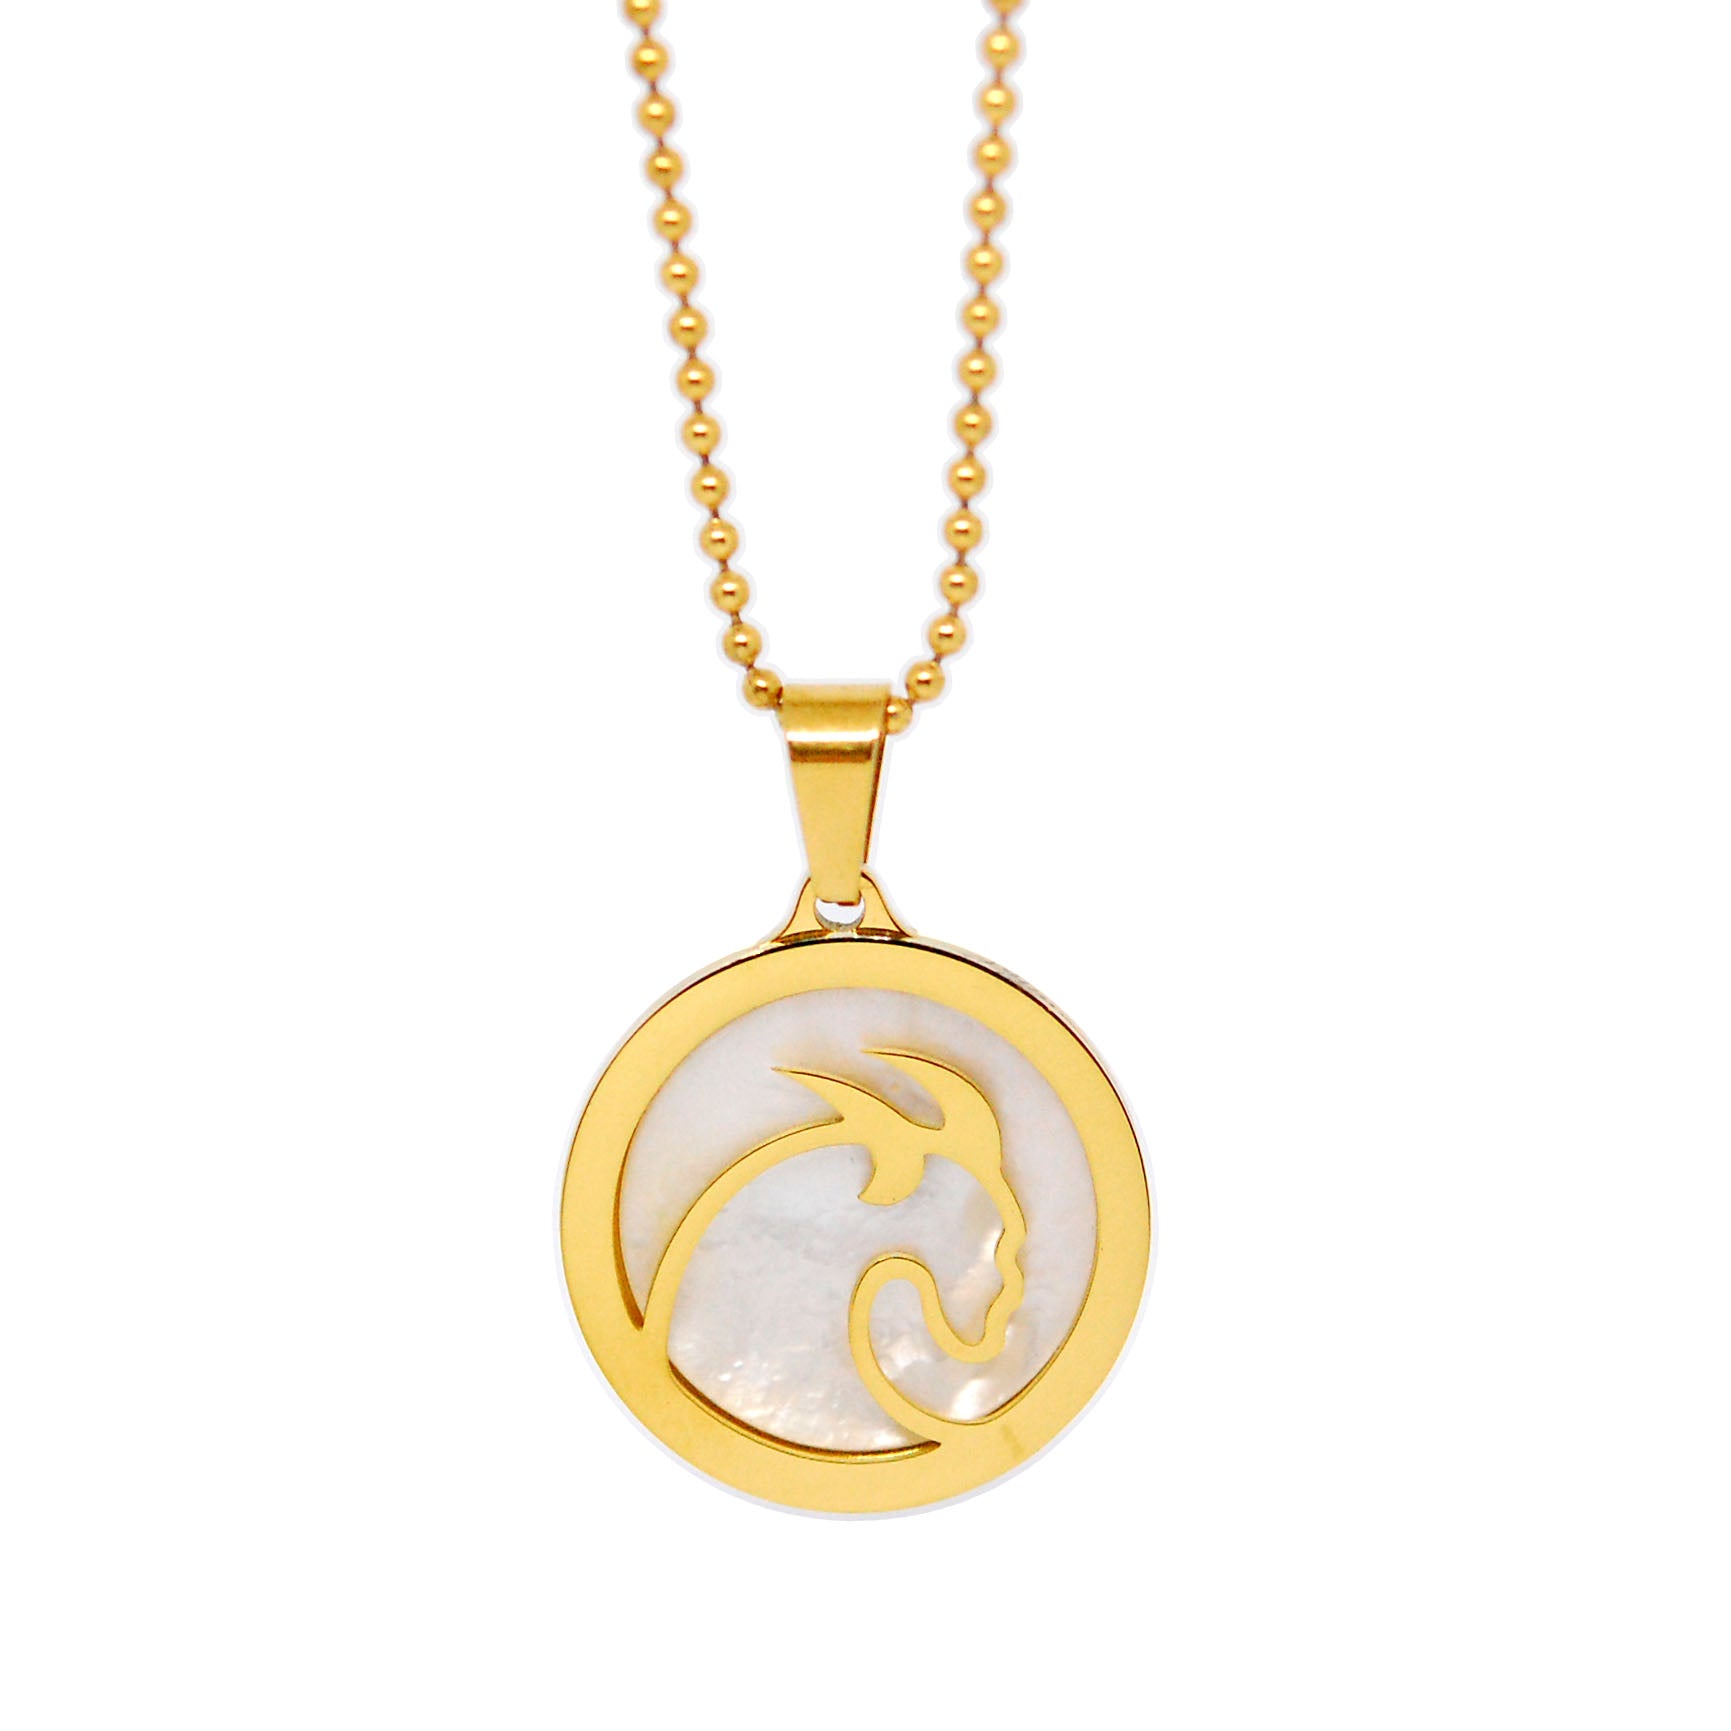 ESN 7968: All IPG Mop Capricorn Zodiac Necklace w/ 18" IPG Ball Chain